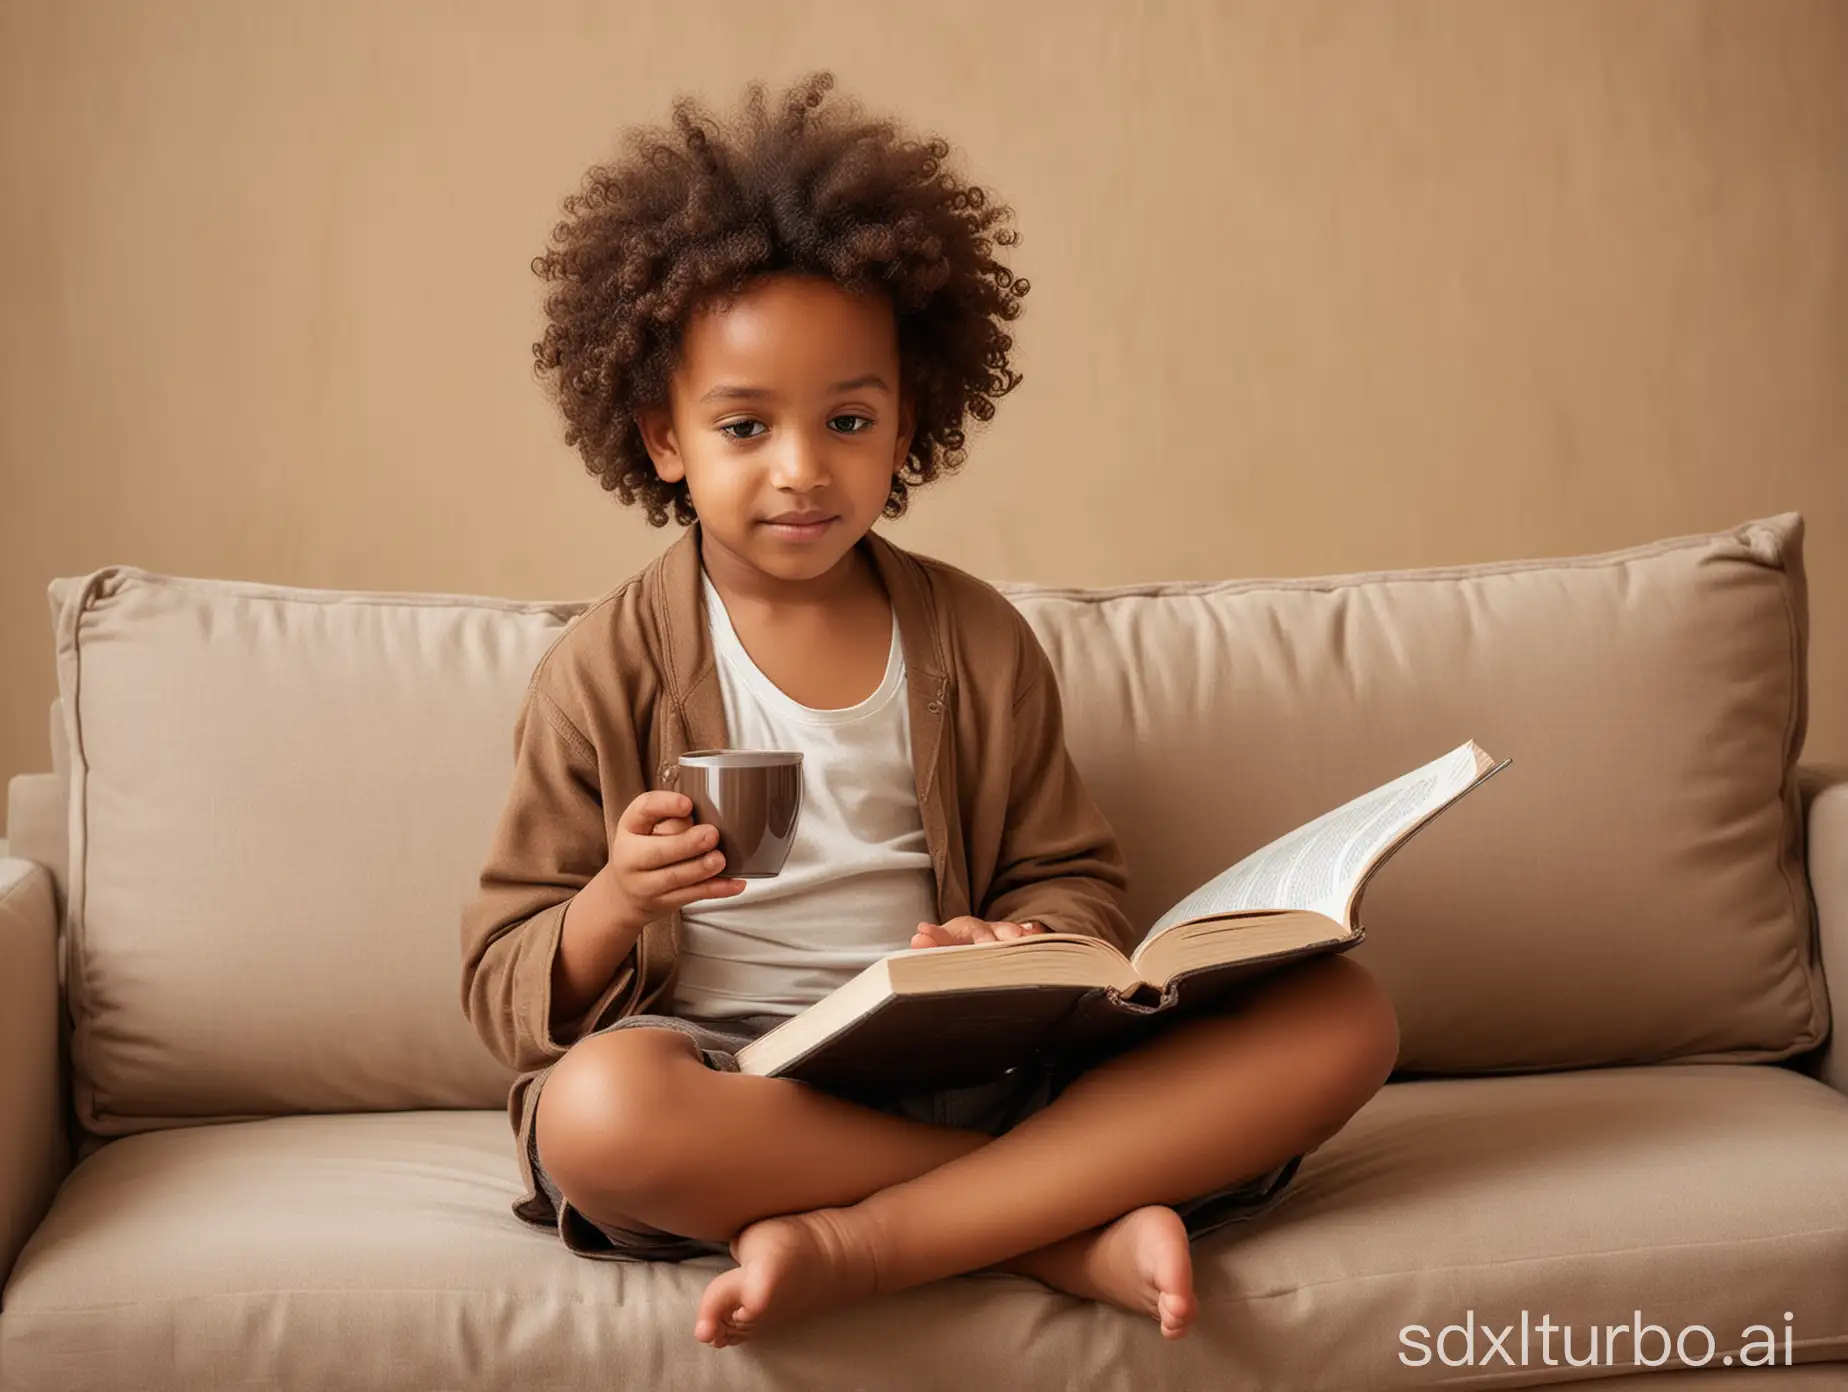 Ethiopian-Baby-with-Curly-Hair-Reading-Book-and-Sipping-Coffee-in-Cozy-Room